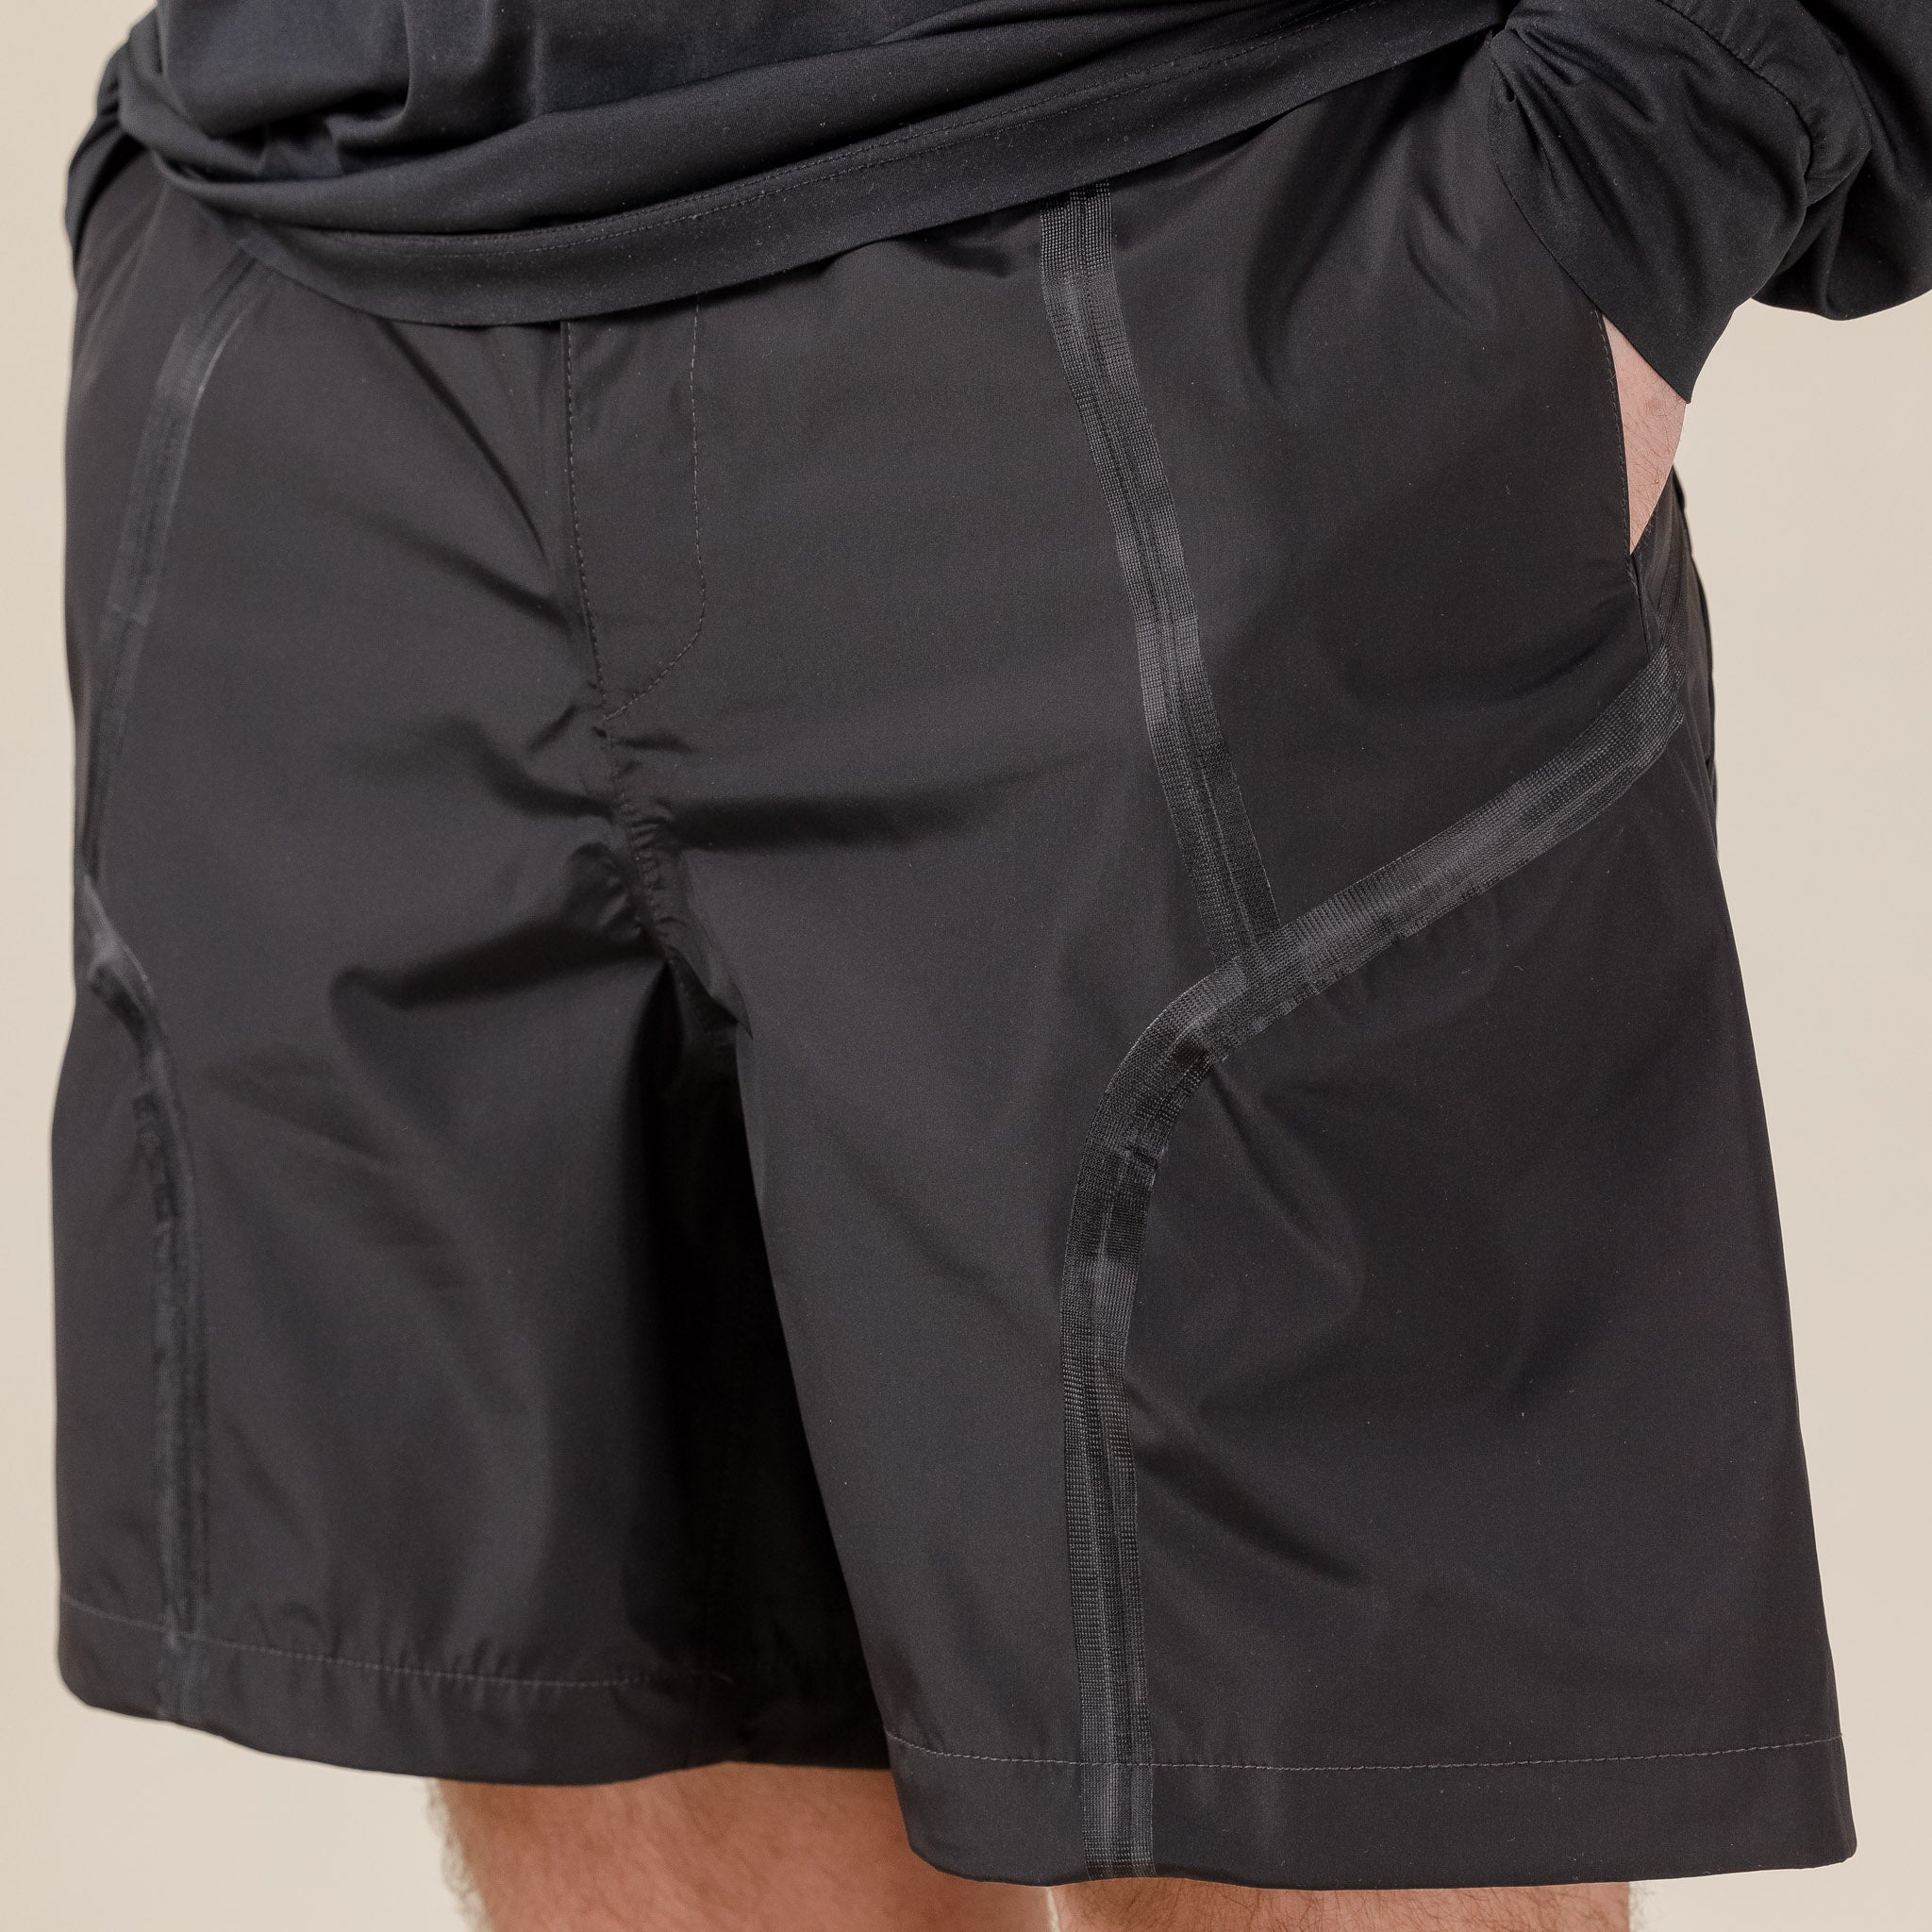 Welter Experiment - WSP003 Seam Sealed 3Layer Shorts - Charcoal Black